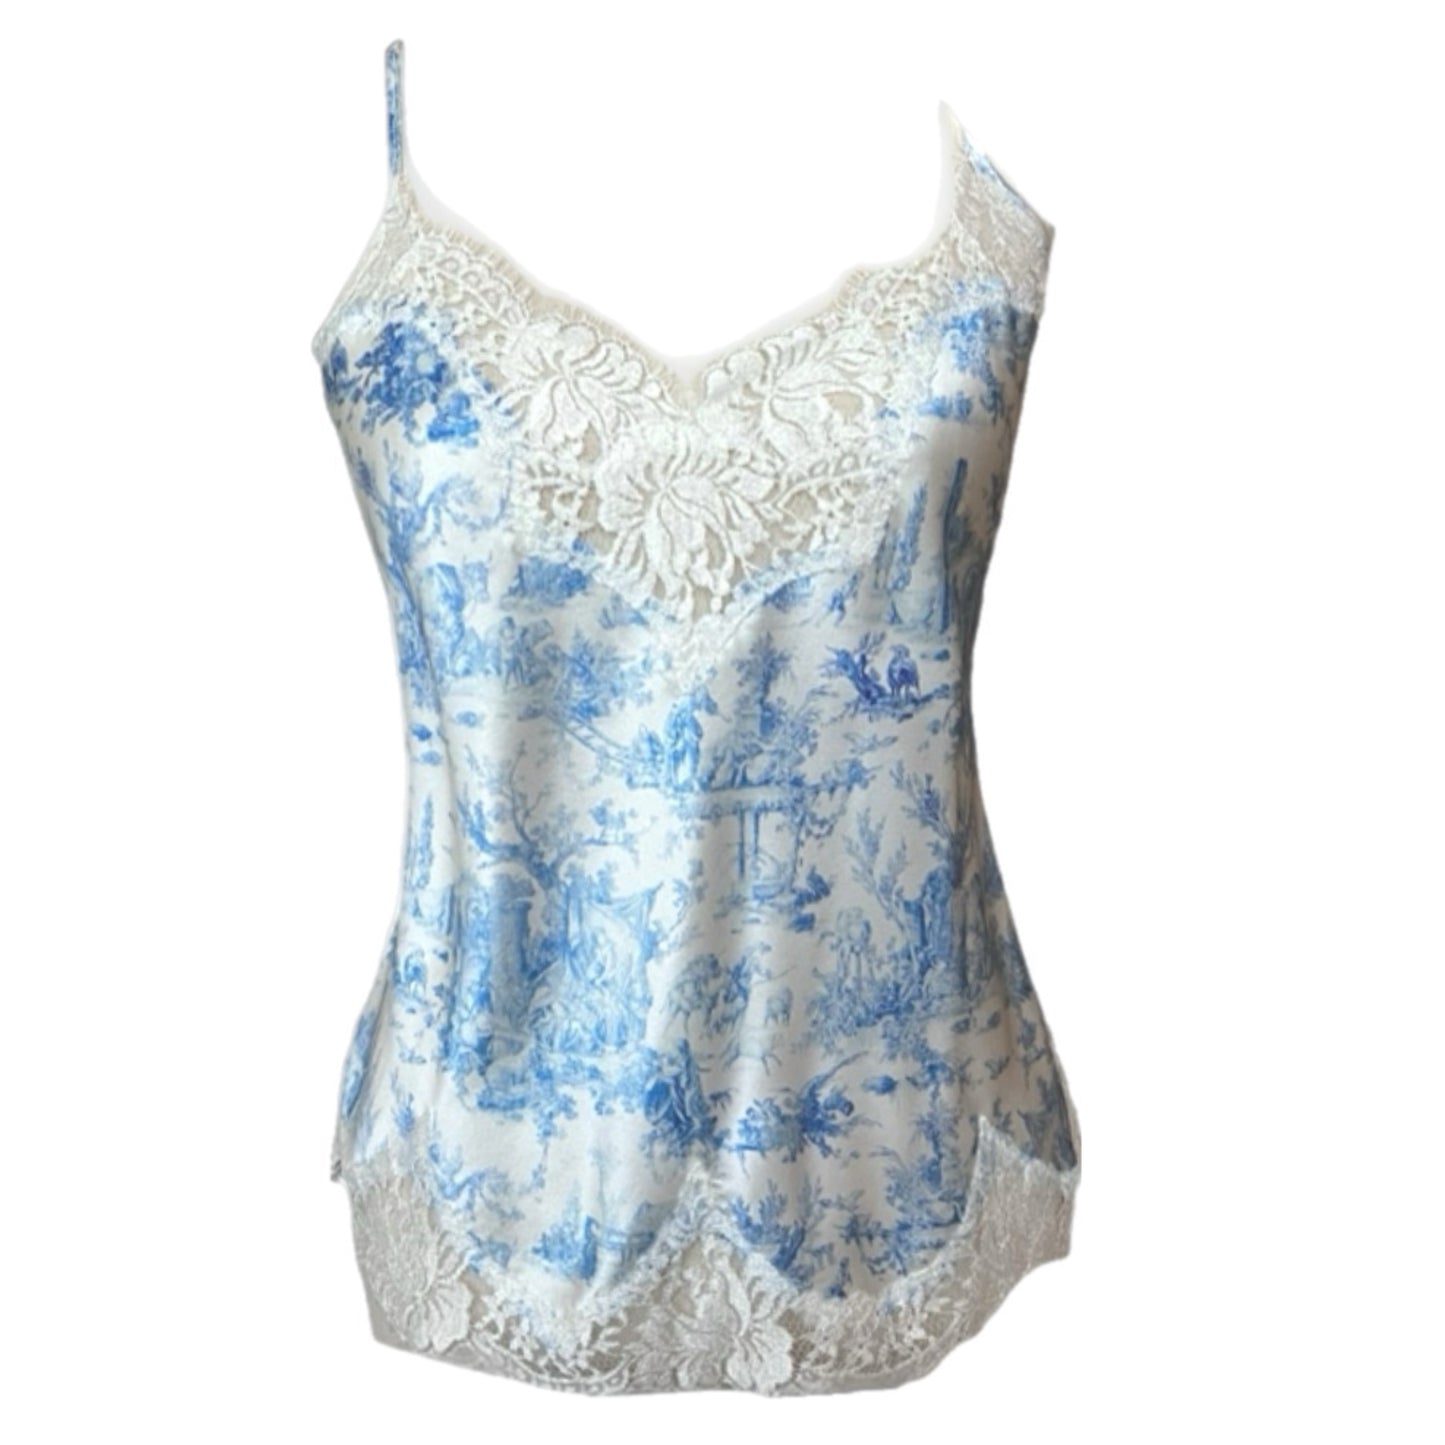 Toile de jouy camisole with French Lace